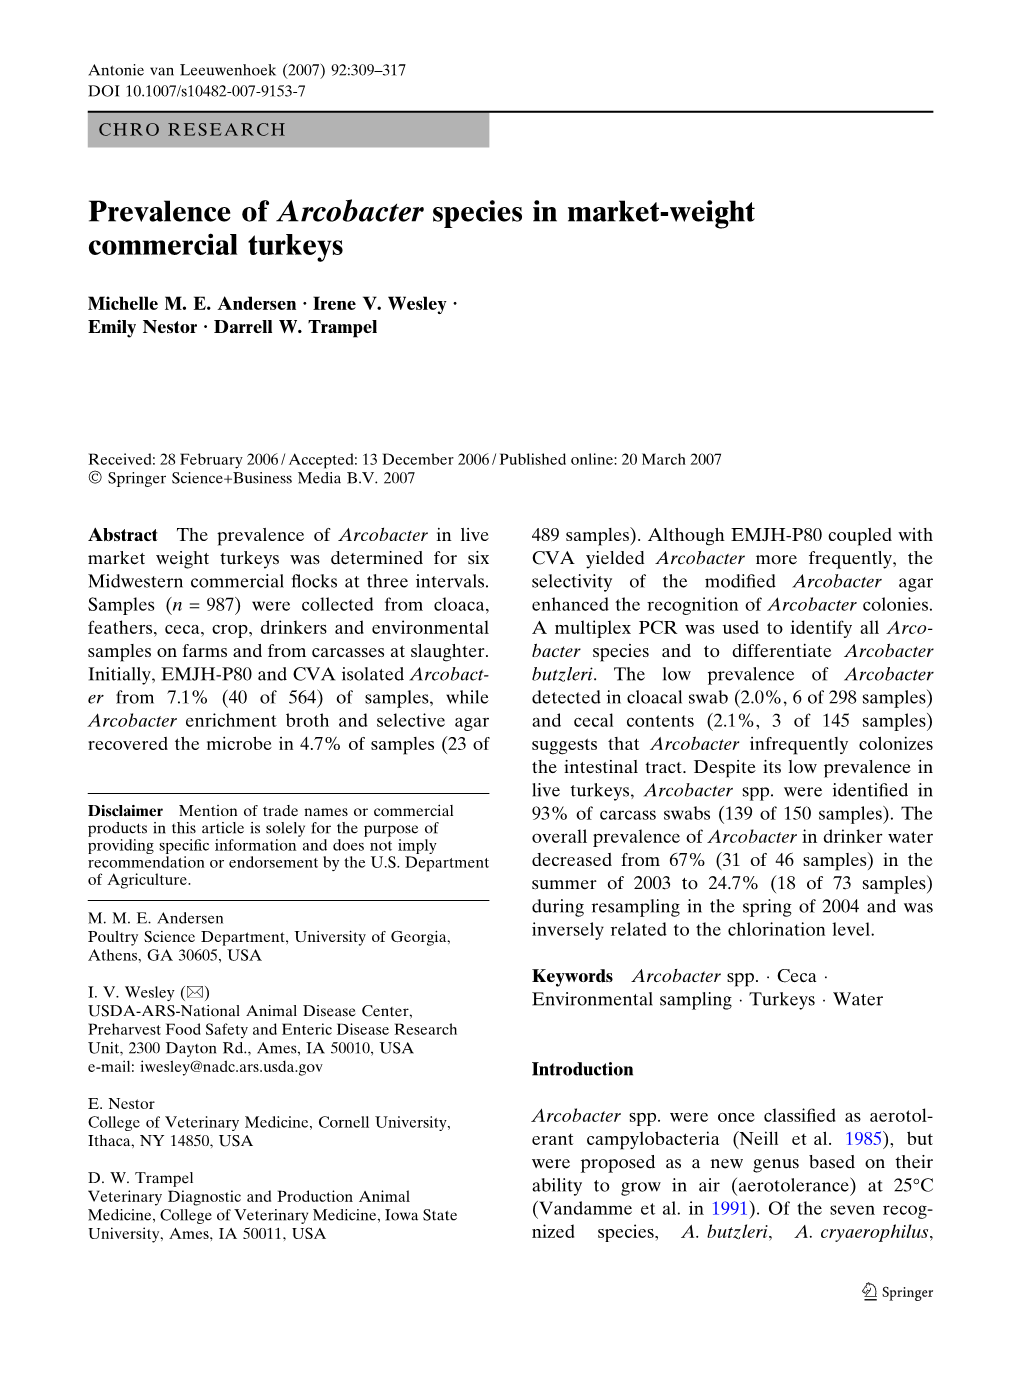 Prevalence of Arcobacter Species in Market-Weight Commercial Turkeys